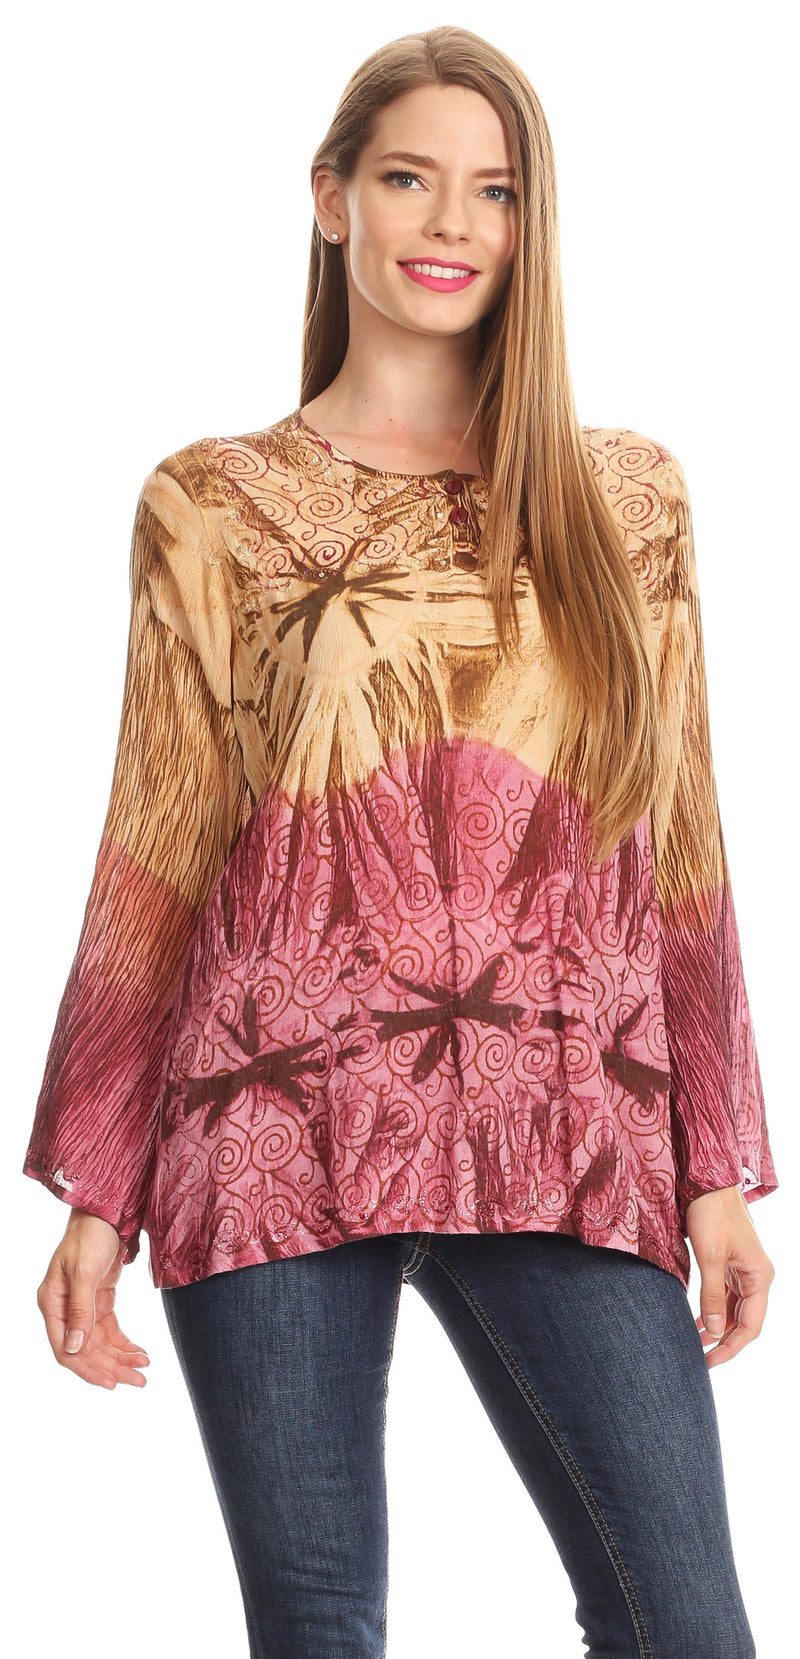 Sakkas Janel Long Bell Sleeve Tie Dye Blouse with Sequins and Embroidery